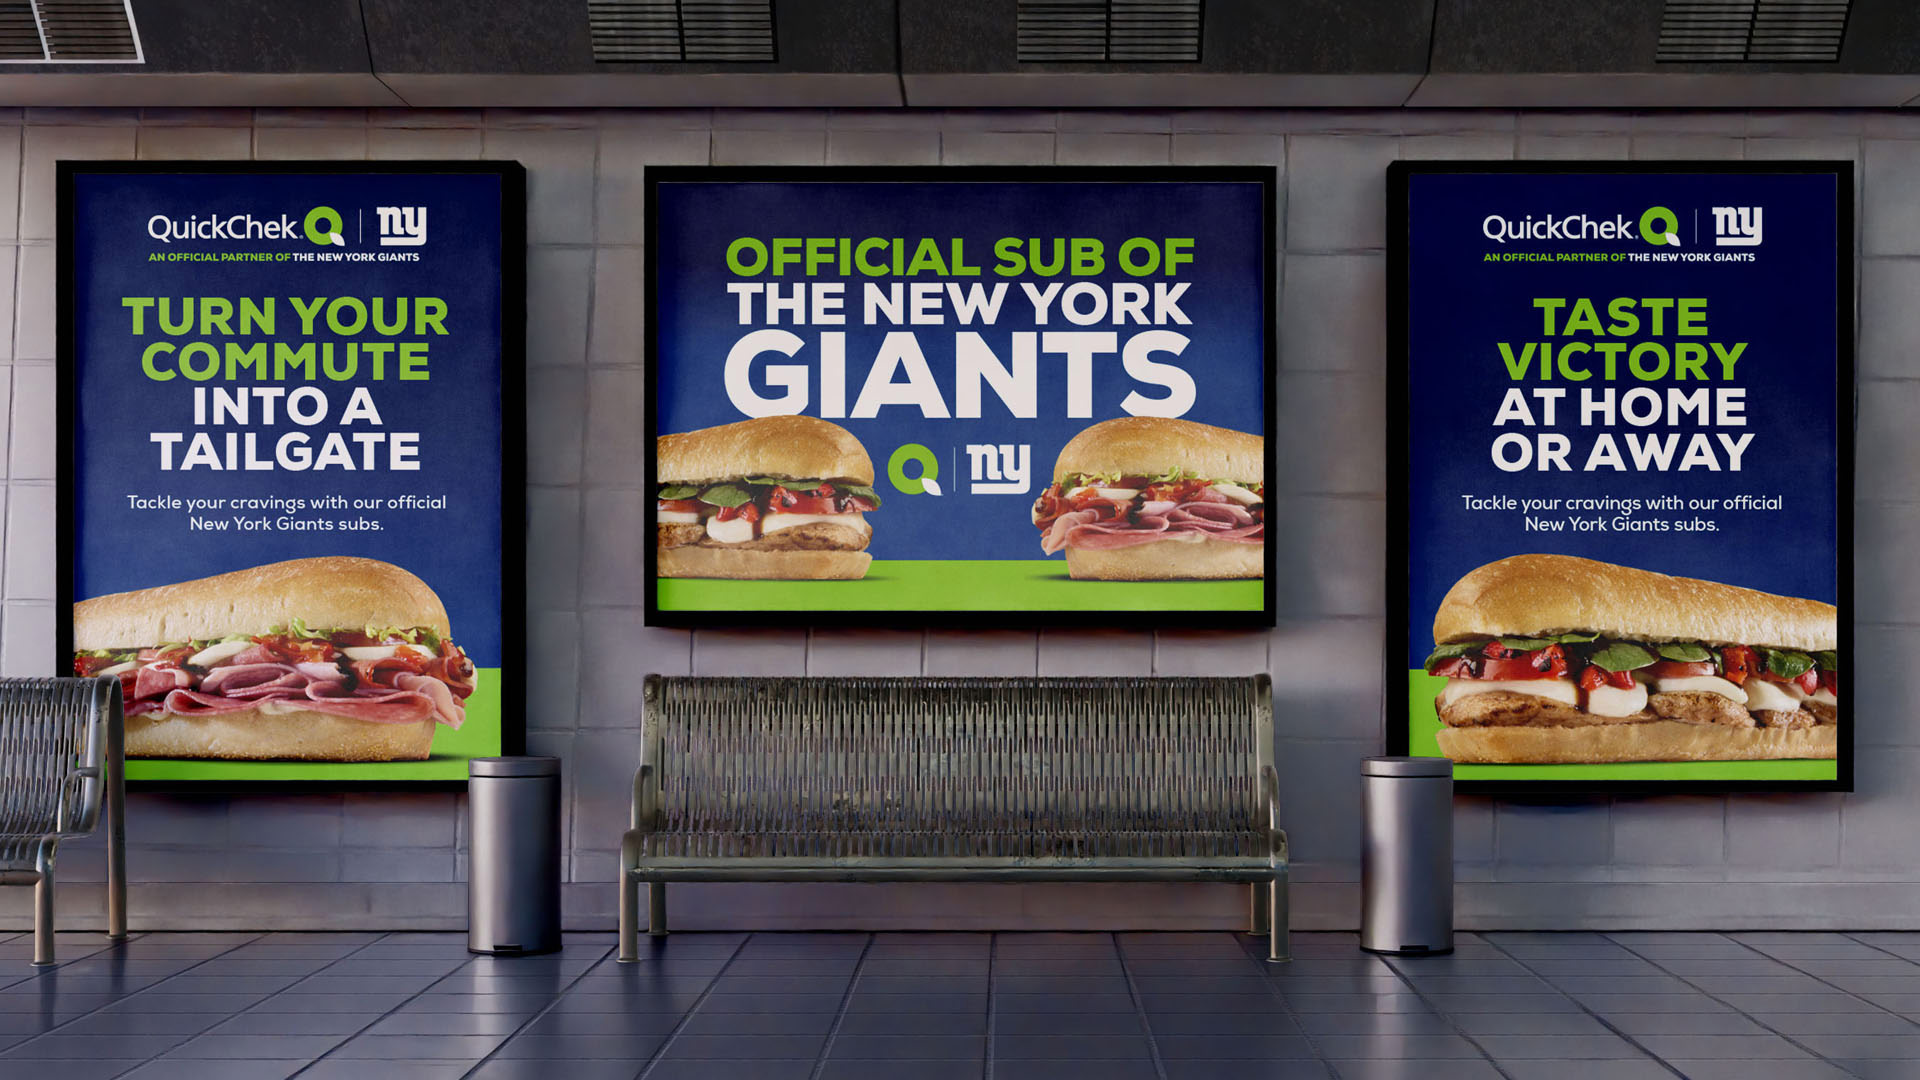 Out of Home Marketing - Subway Poster Designs - The Official Sub of the New York Giants by QuickChek